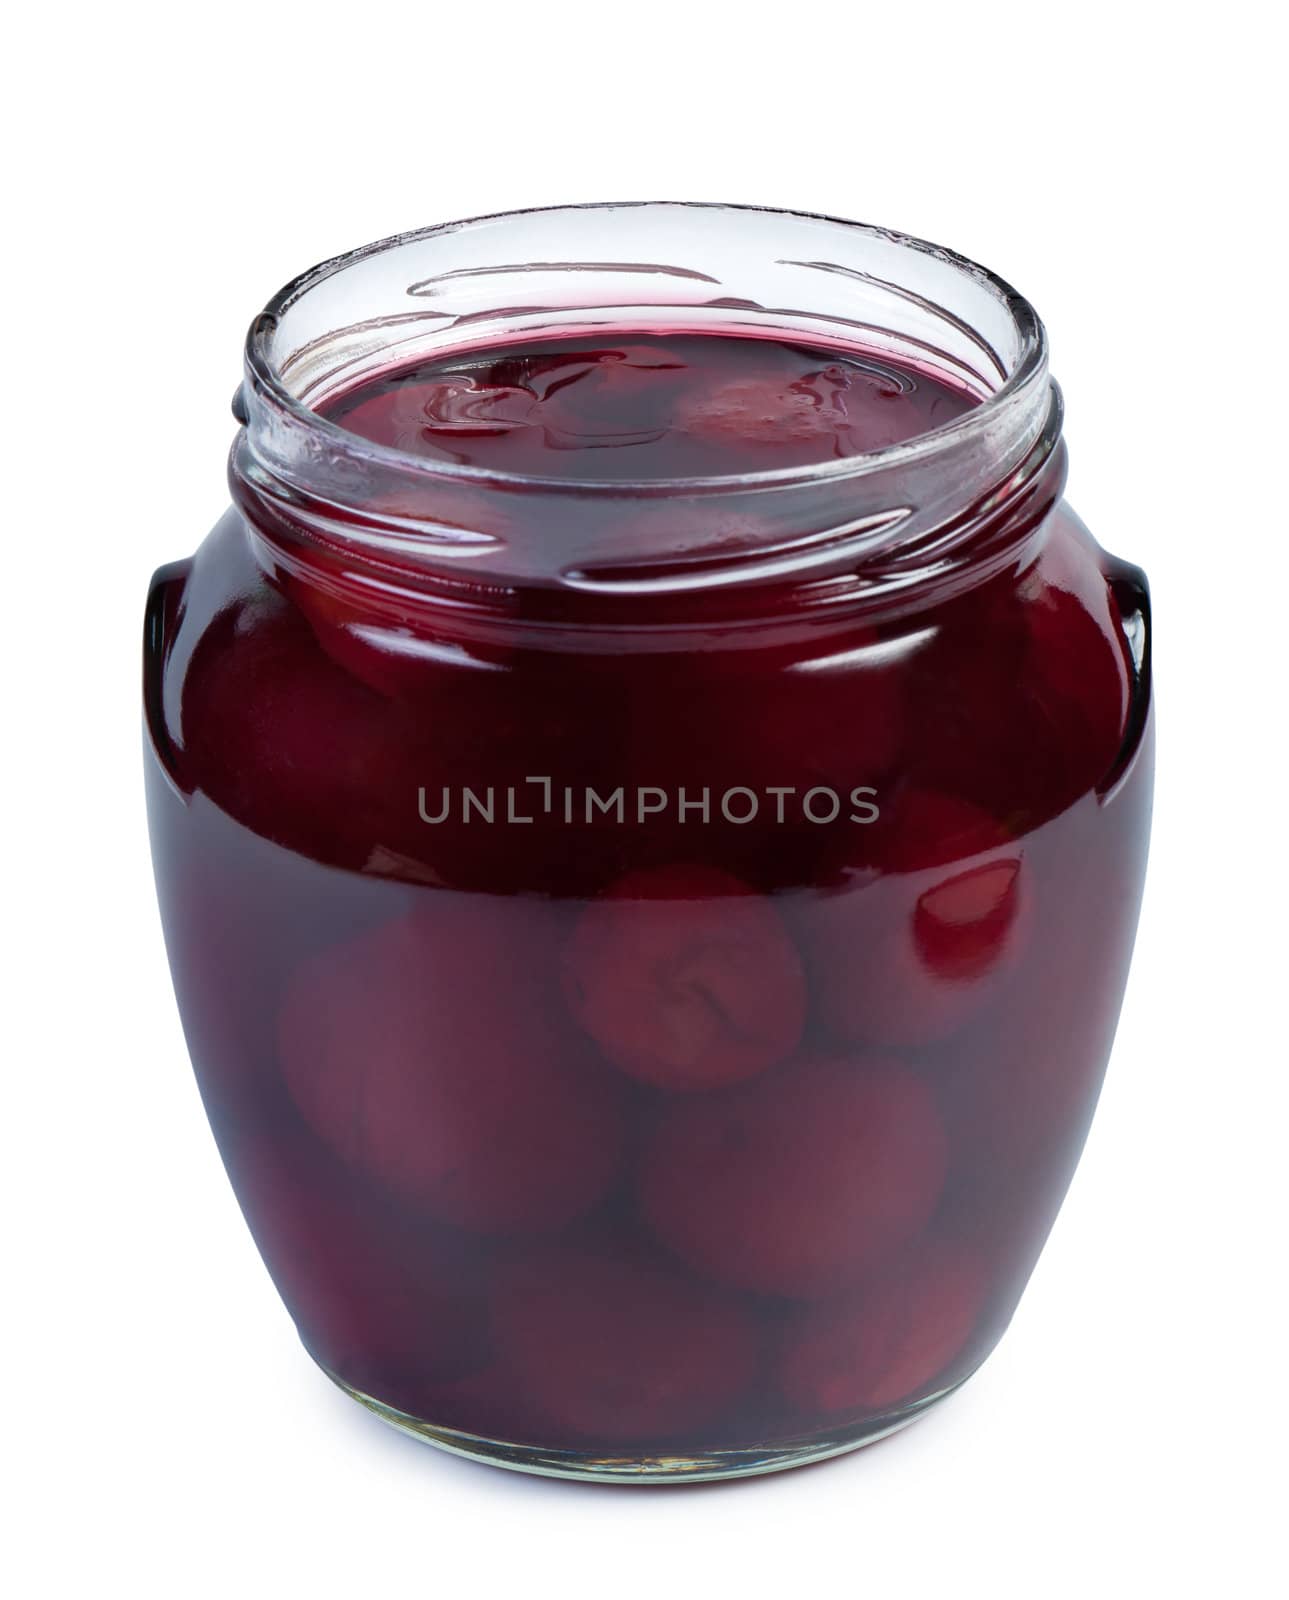 Canned fruit in open glass jar isolated on white background.